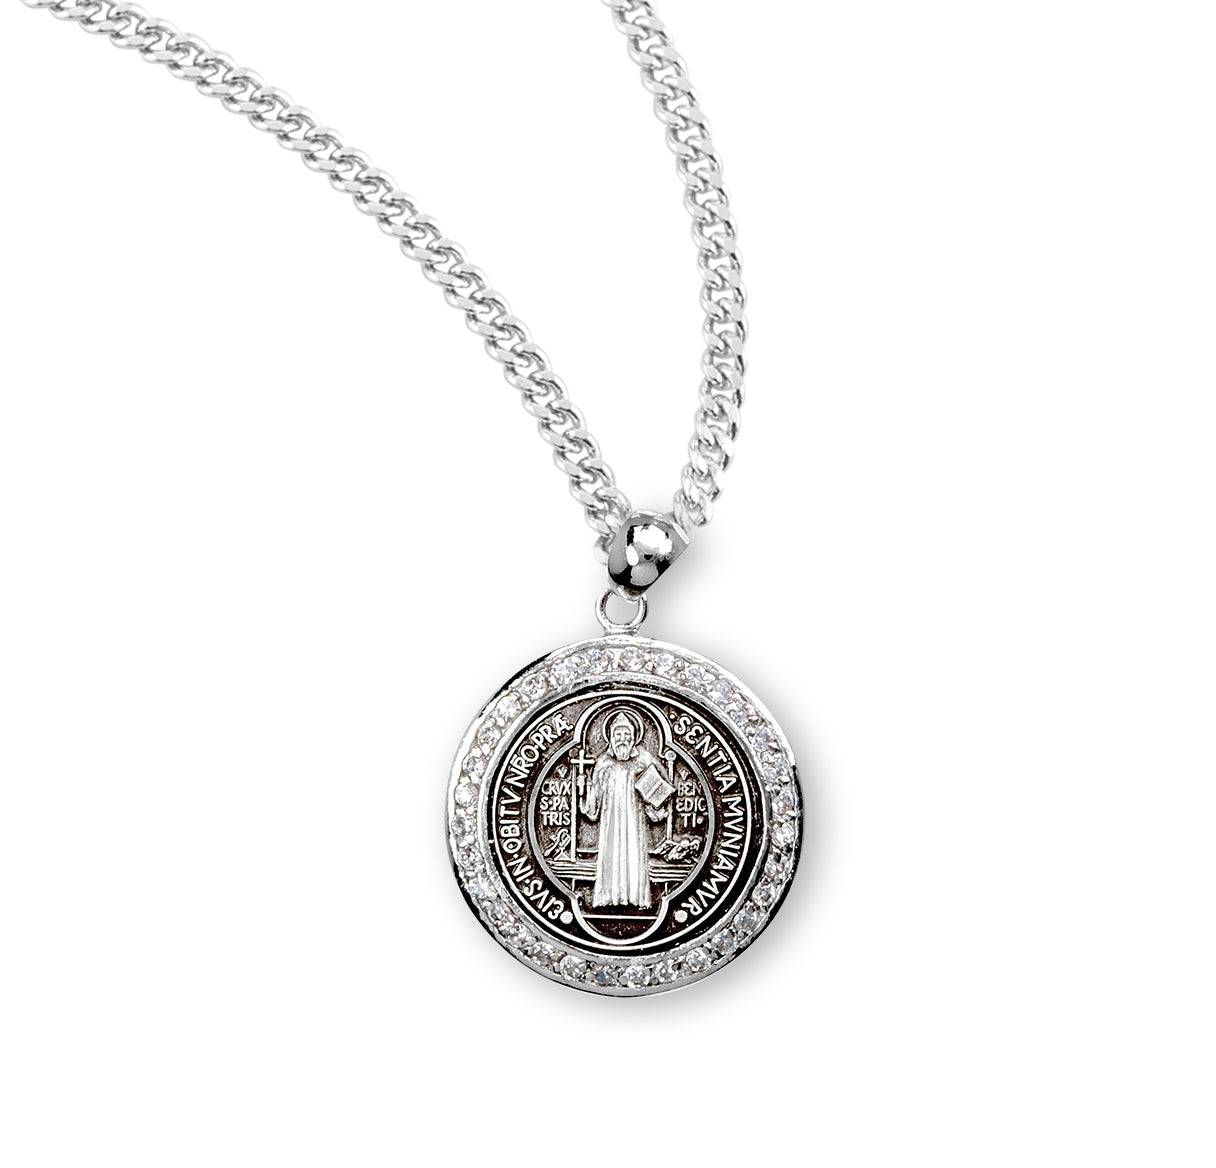 Saint Benedict Round Sterling Silver Medal with Cubic Zirconia's "CZ's"